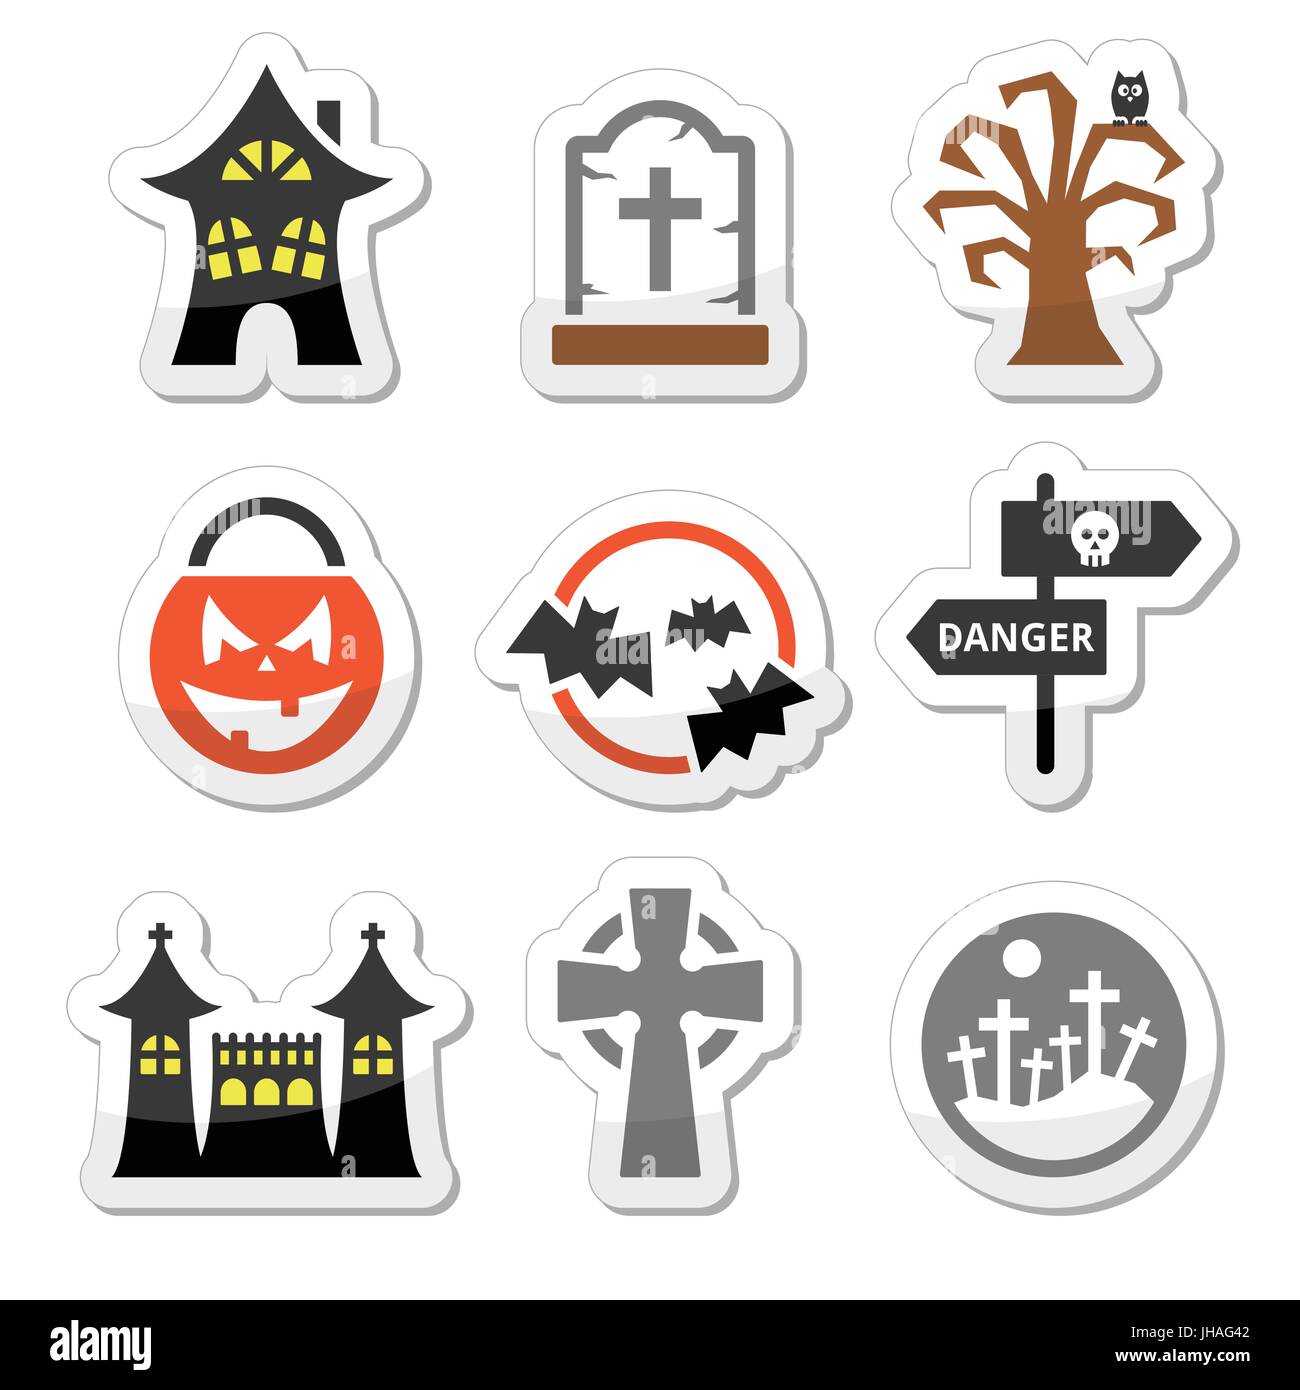 Halloween vector icons set    Icons set for celebrating Halloween isolated on white Stock Vector